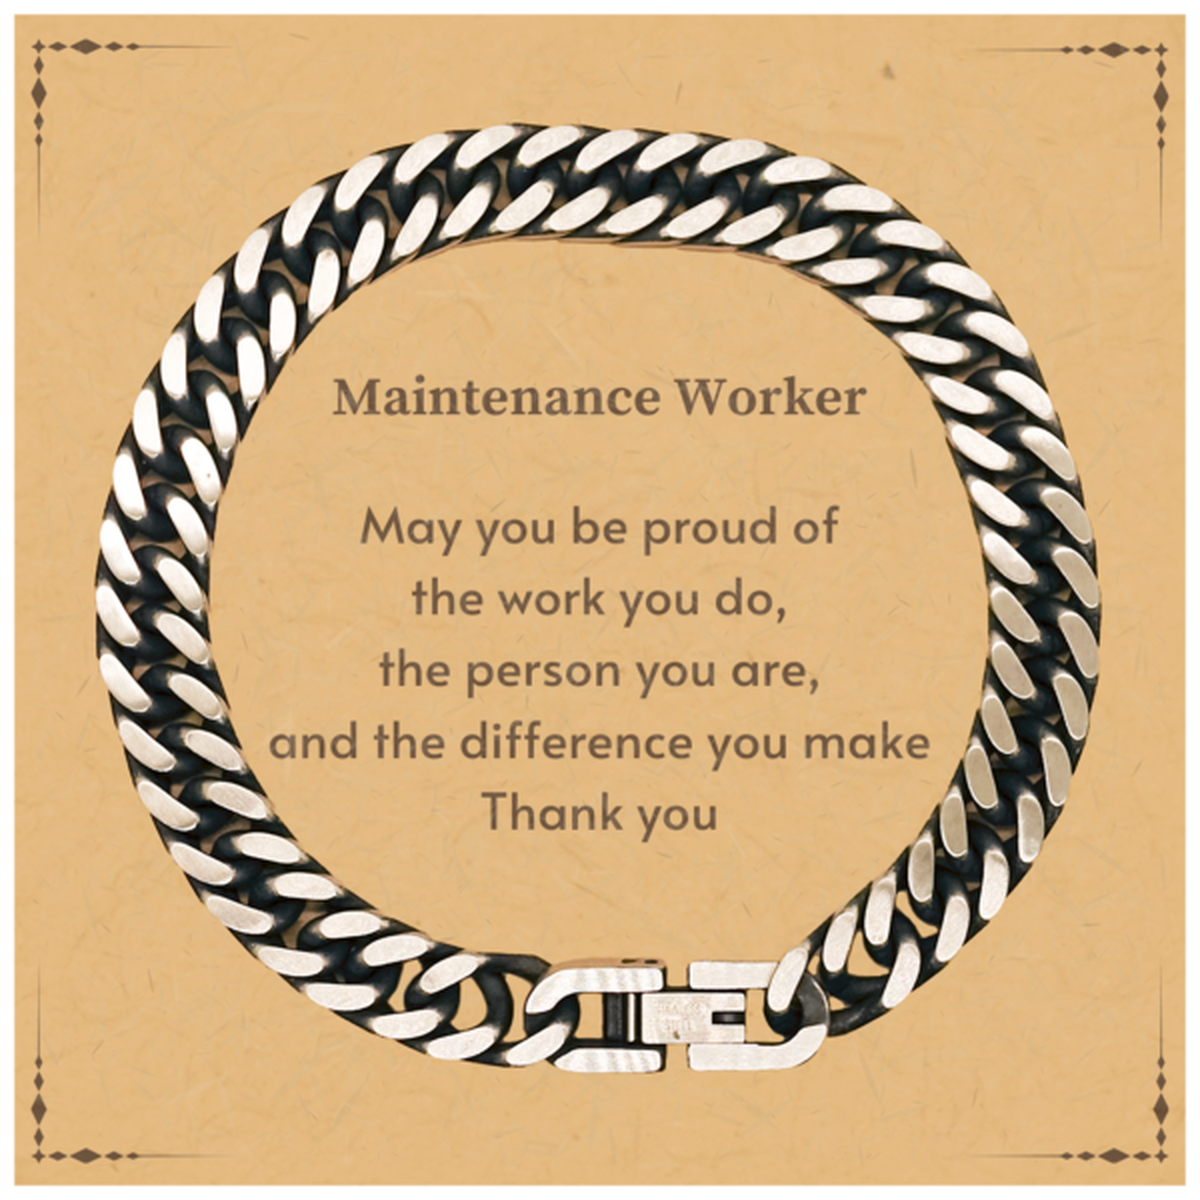 Heartwarming Cuban Link Chain Bracelet Retirement Coworkers Gifts for Maintenance Worker, Maintenance Worker May You be proud of the work you do, the person you are Gifts for Boss Men Women Friends